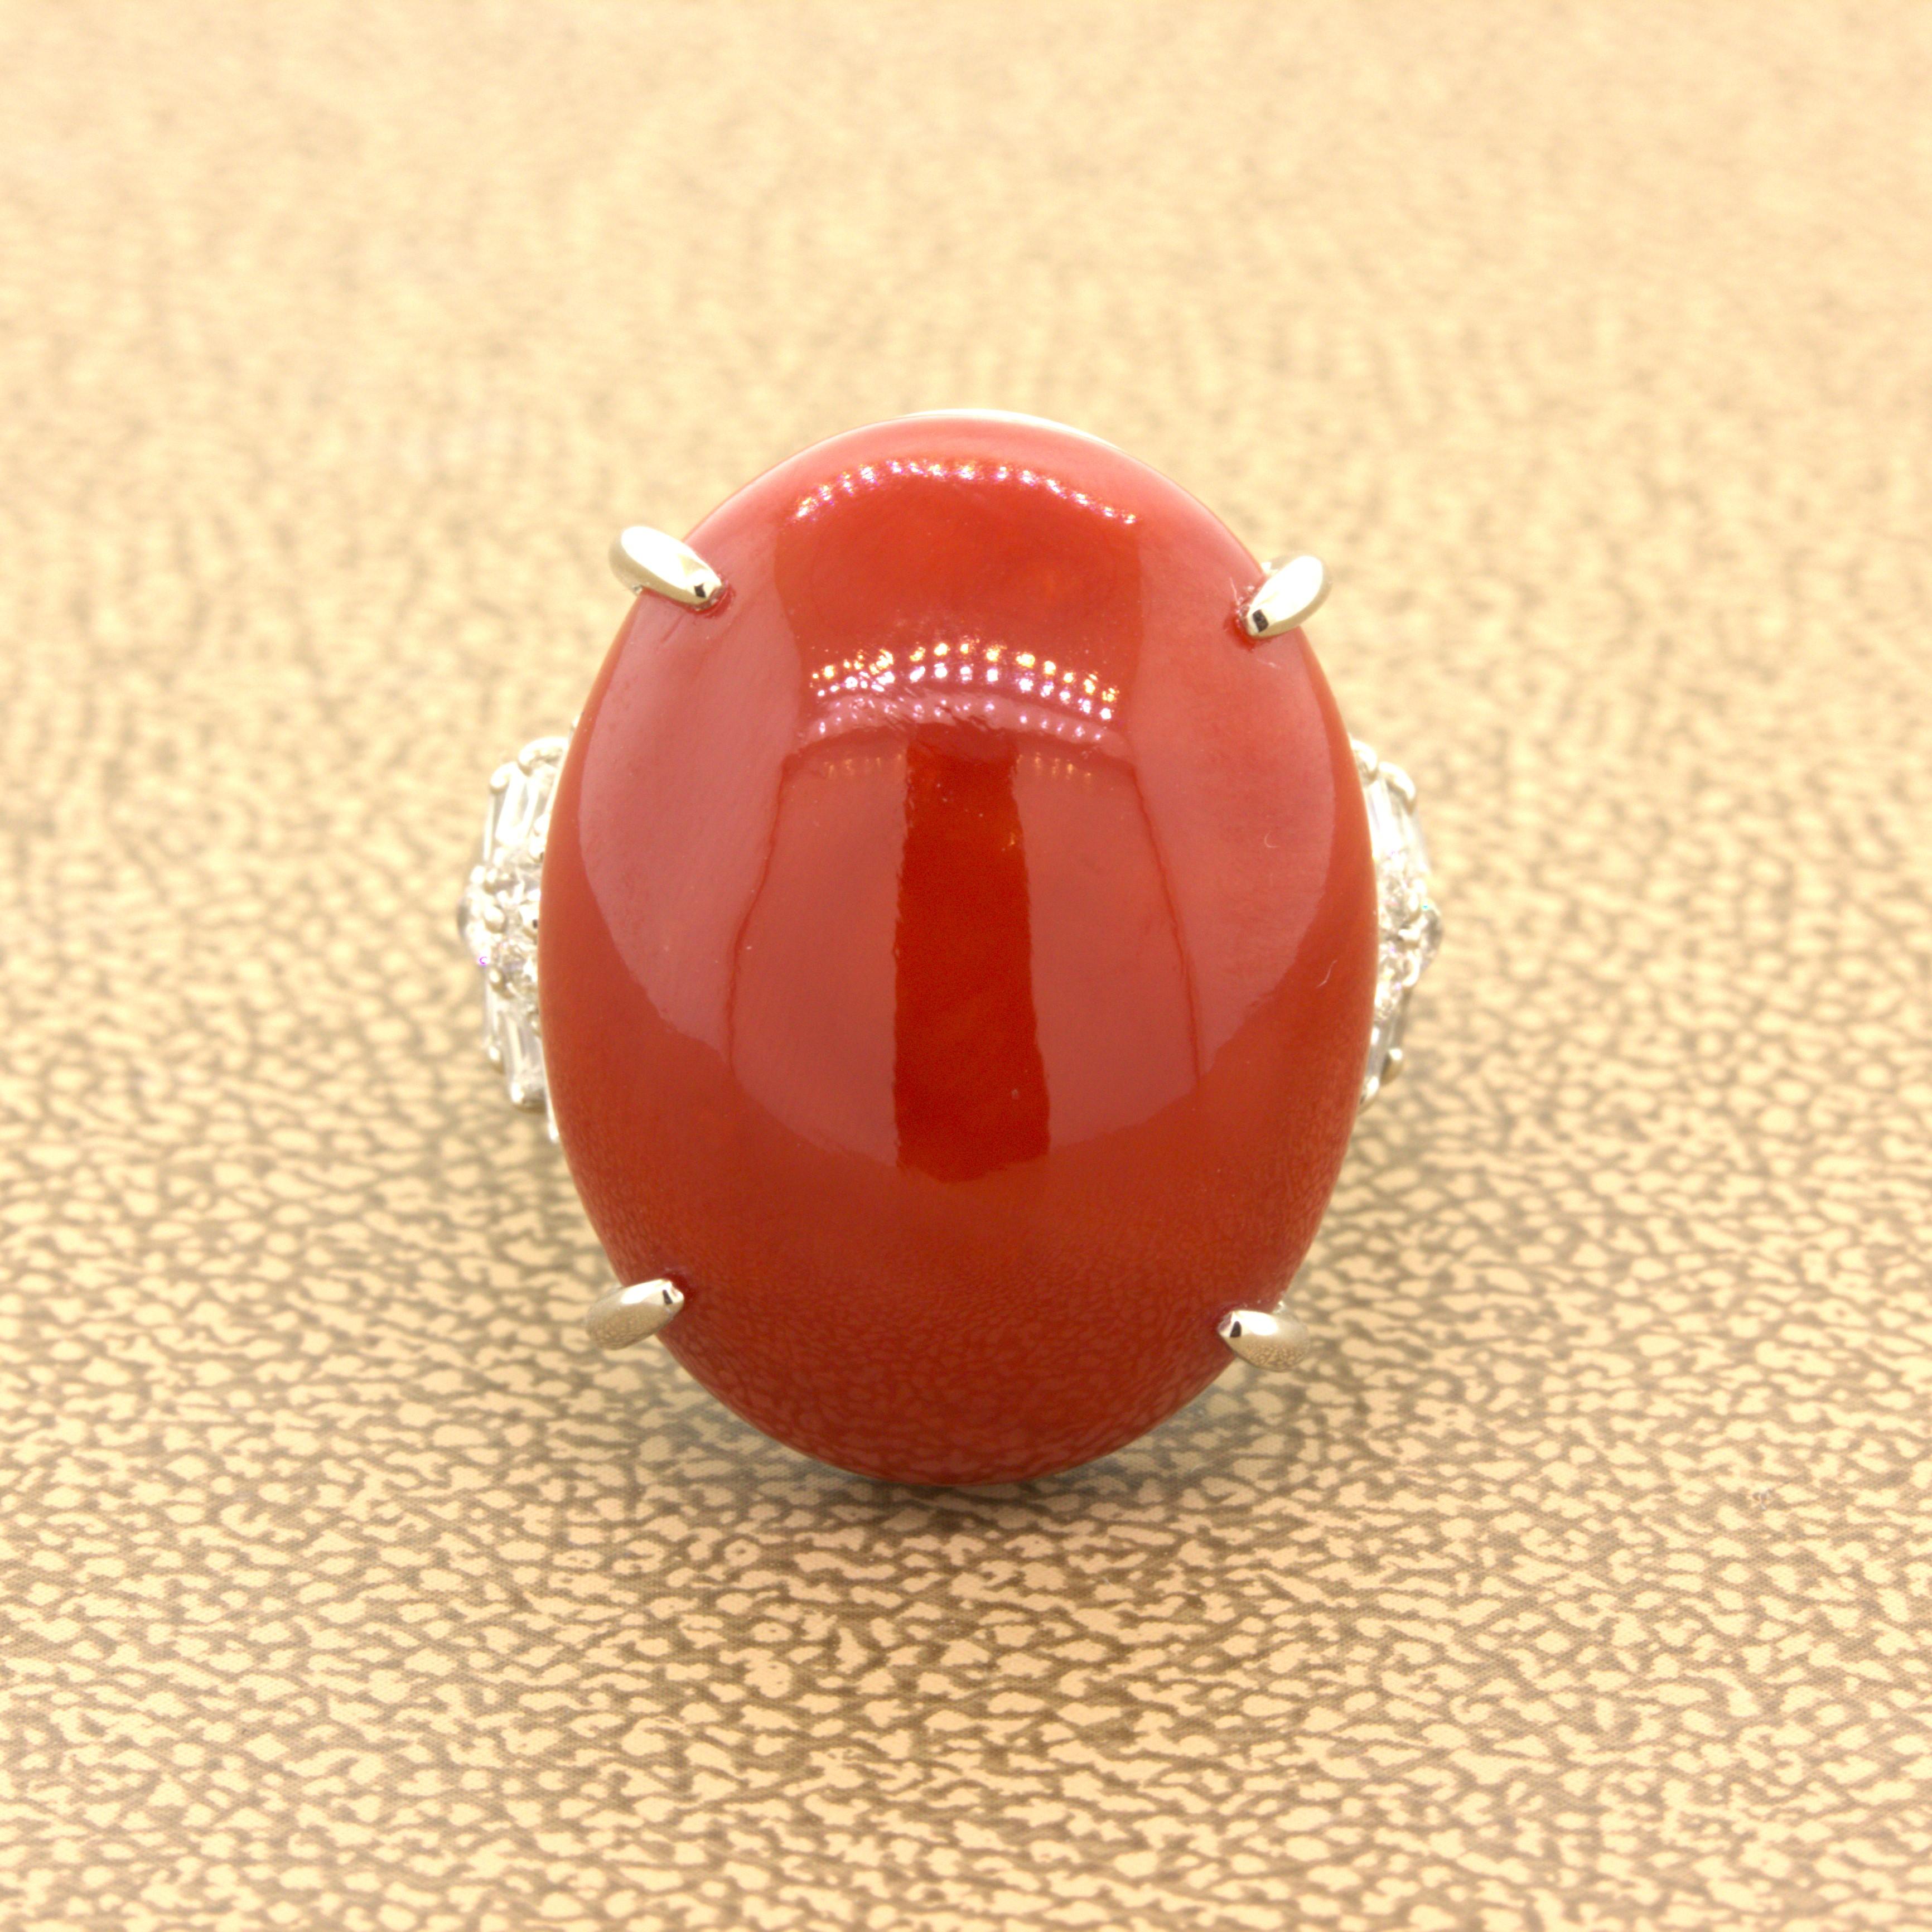 Ox Blood Coral Diamond Platinum Ring

A large and fine piece of natural Italian coral takes center stage. It weighs an impressive 22.06 carats and has a rich intense red color known in the trade as “ox blood” for only the finest quality red coral.